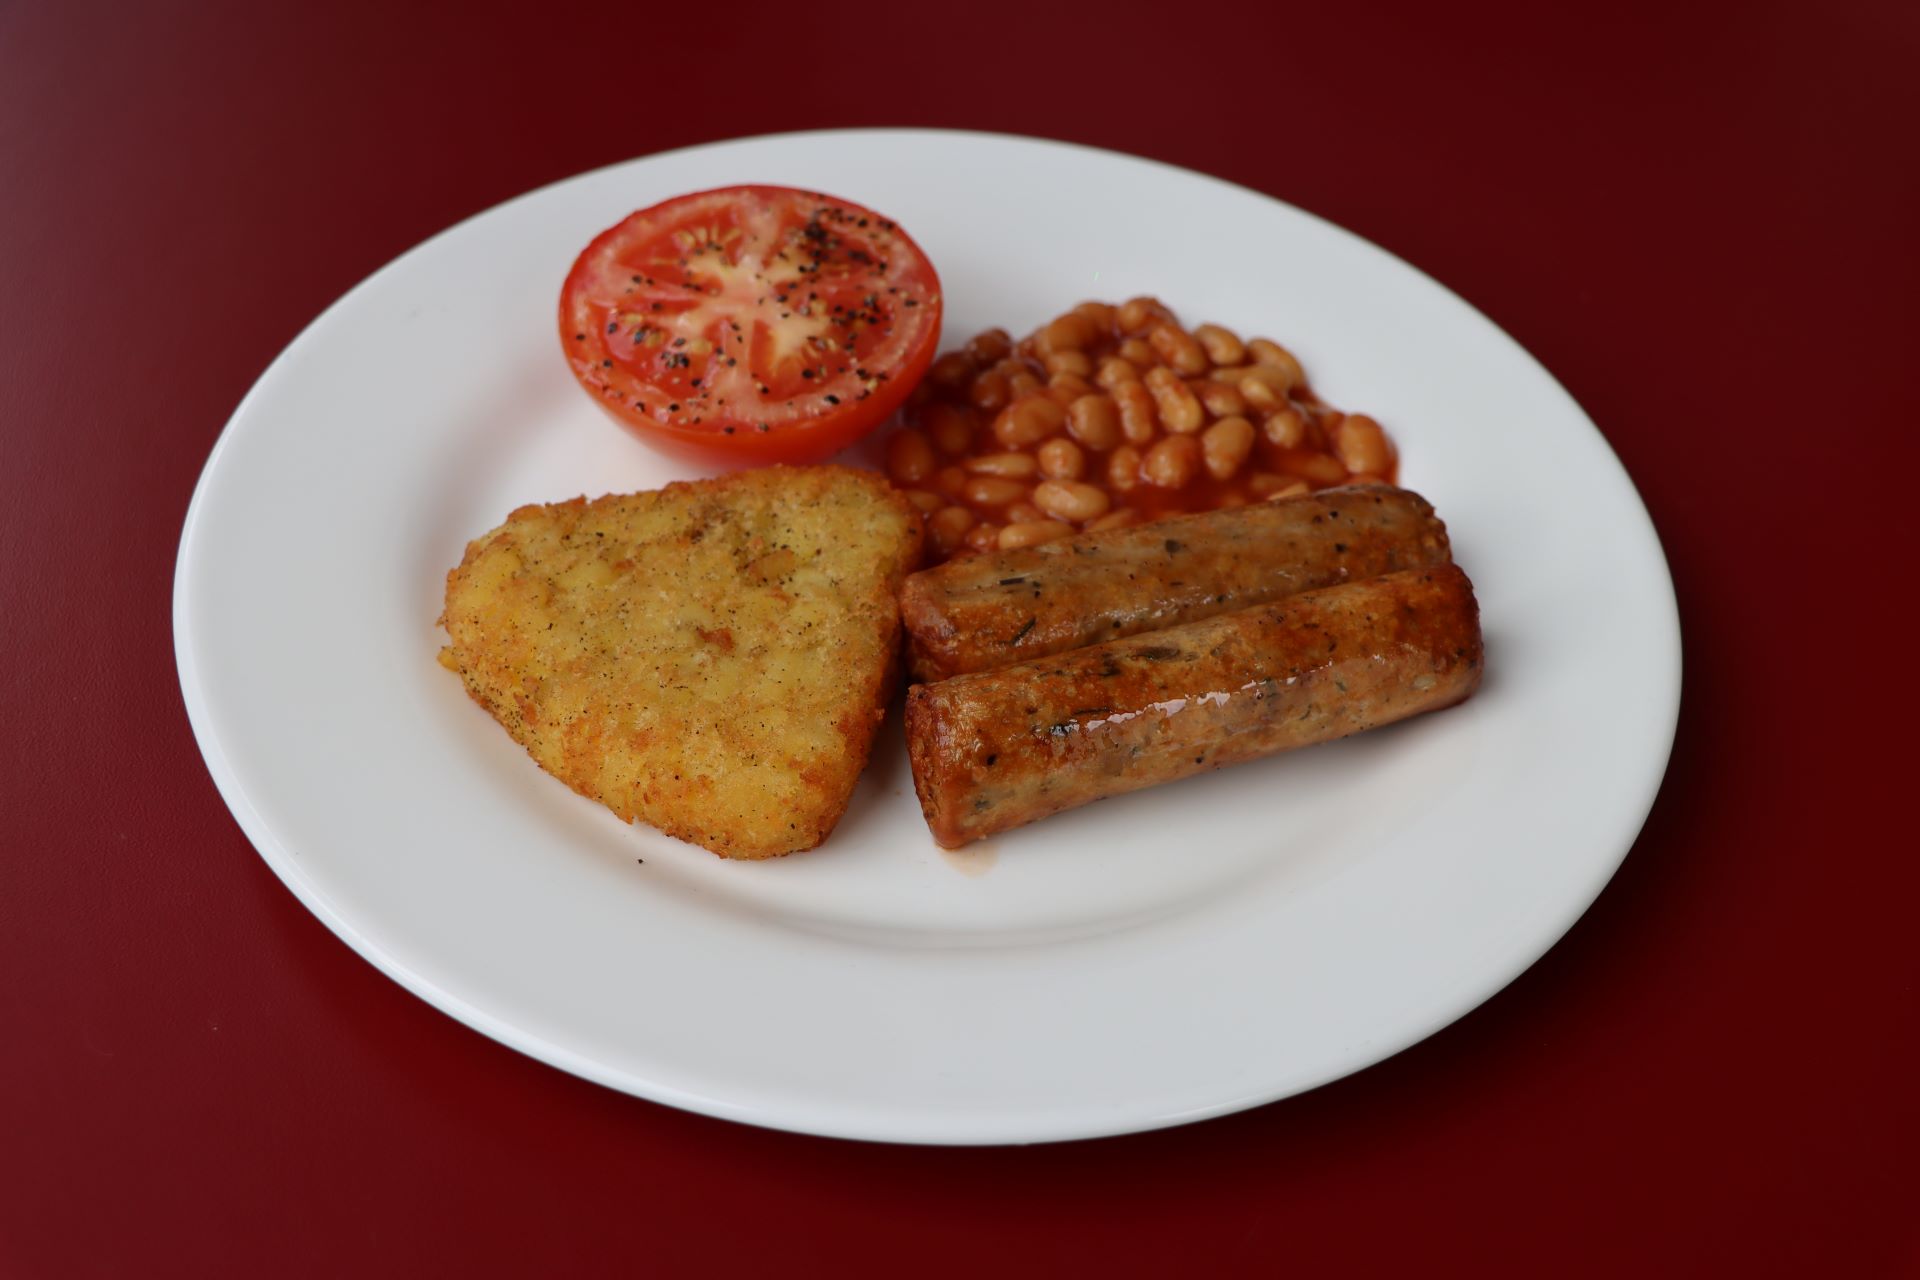 Vegetarian Brunch: Quorn Sausage, Hash Brown, Tomato and Beans